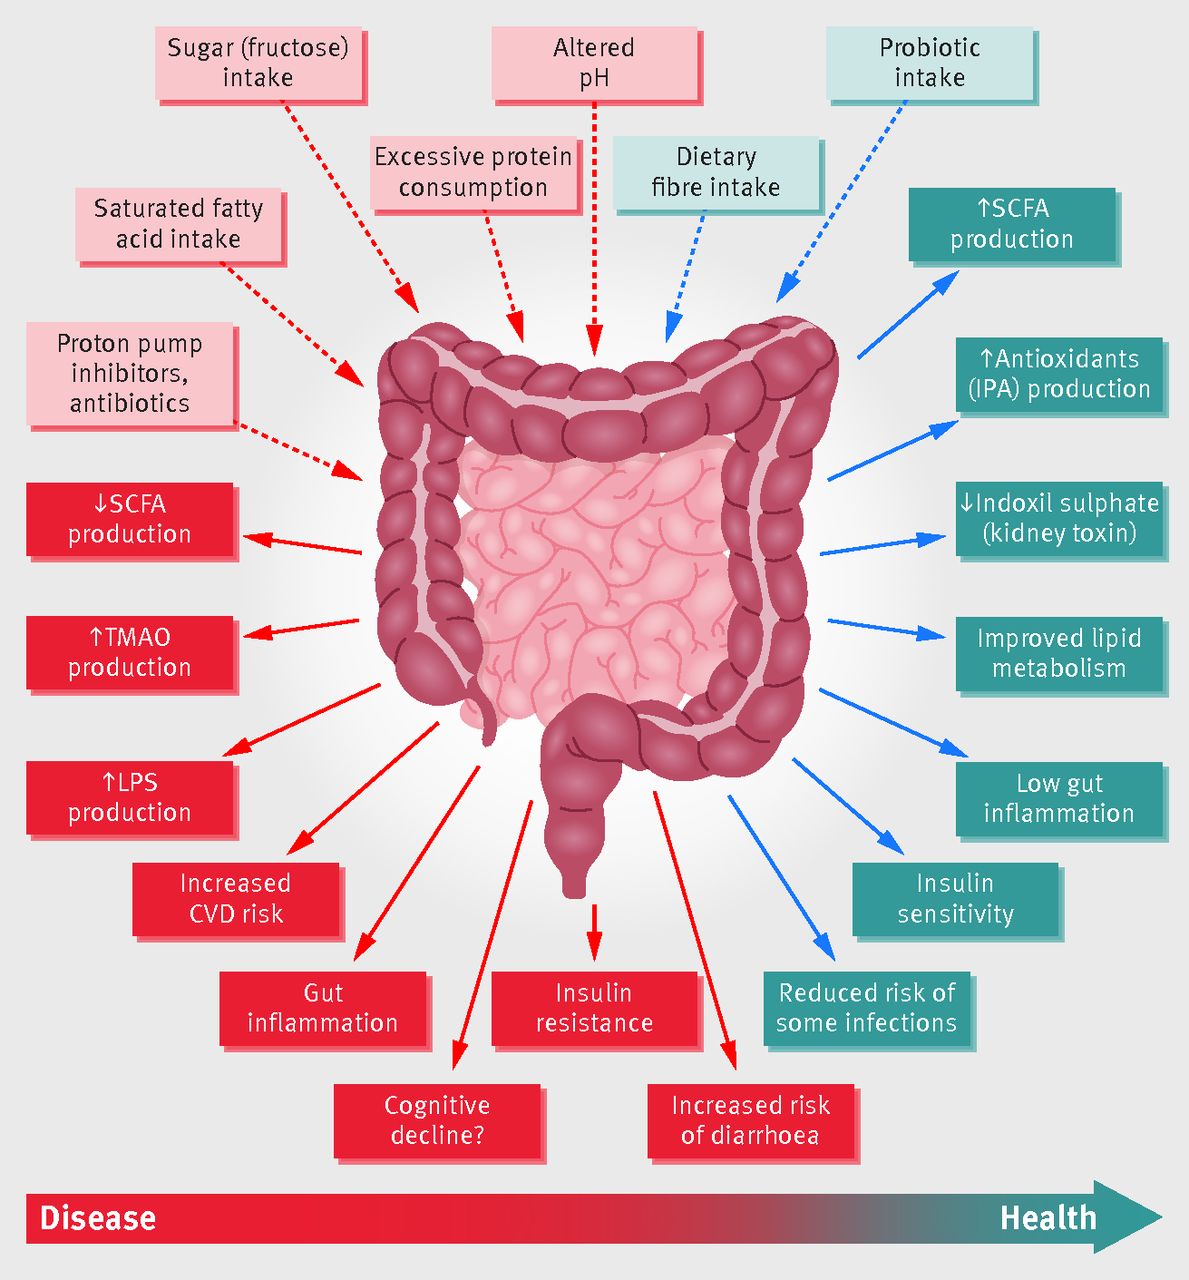 Role of the gut microbiota in nutrition and health